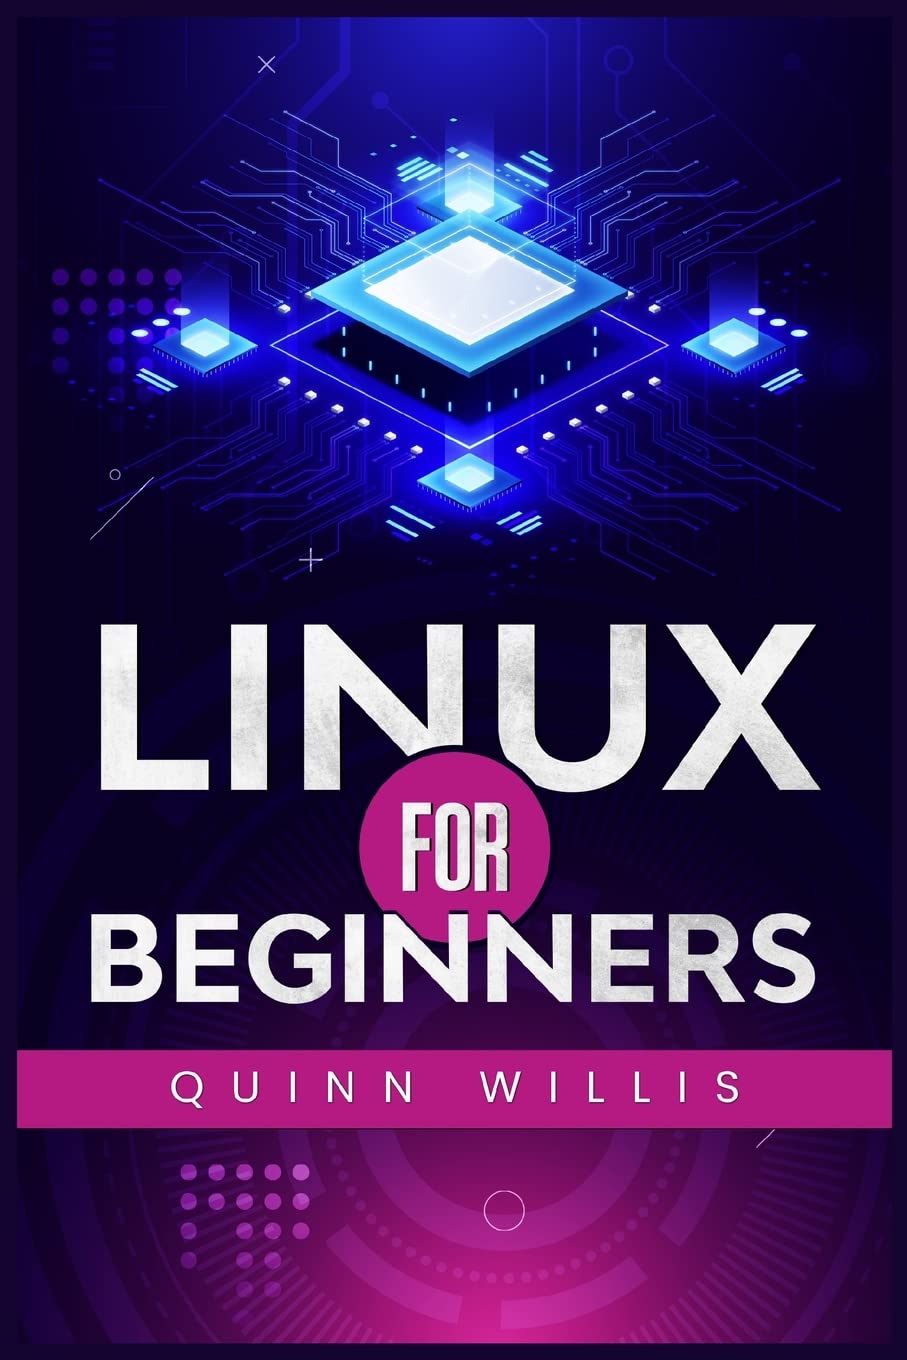 Linux for Beginners: A Quick Start Guide to the Linux Command Line and Operating System by Quinn Willis